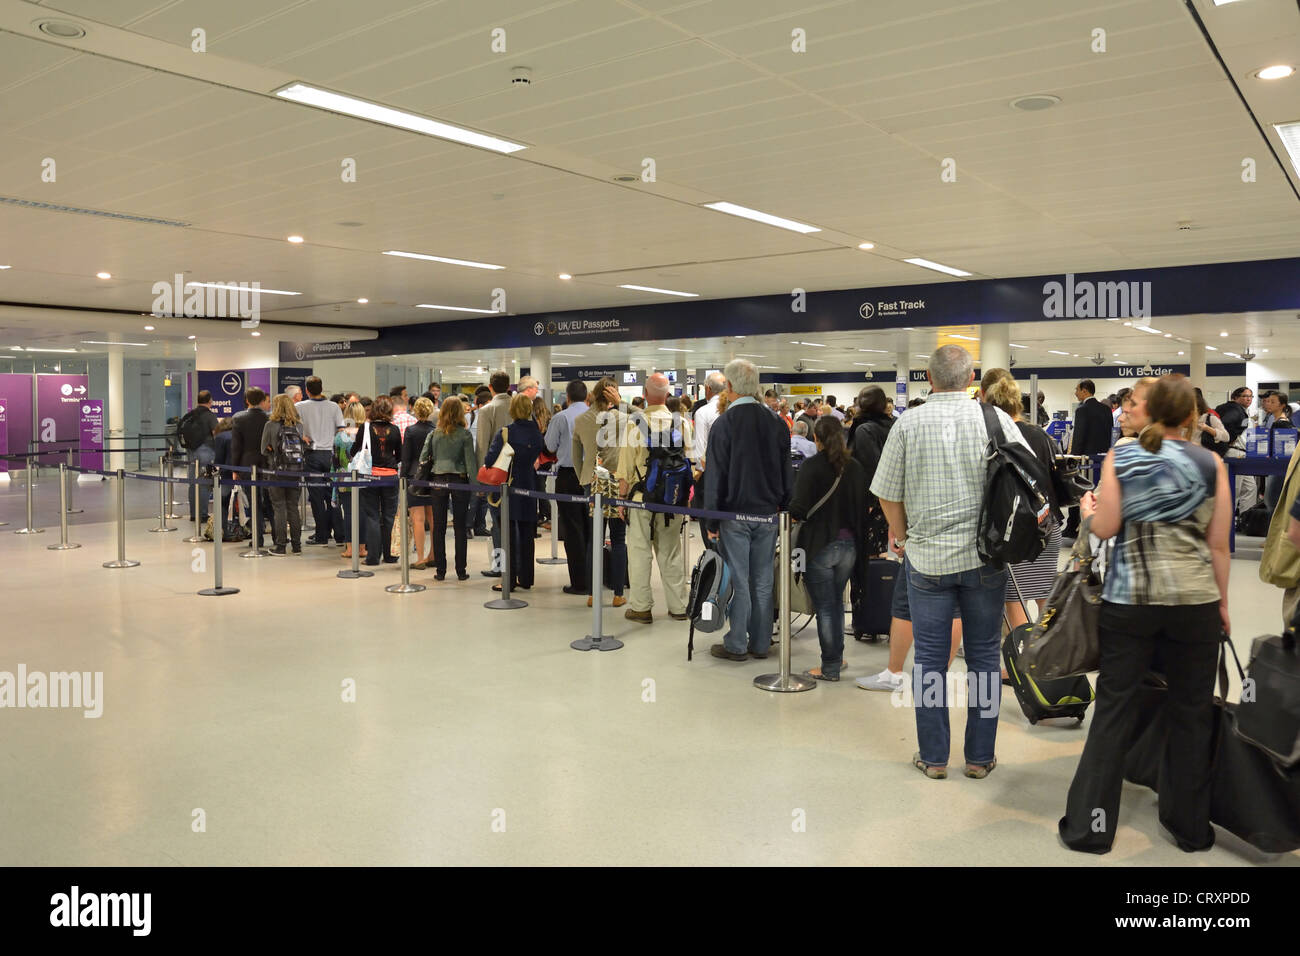 Crowded arrivals hall, North Terminal, London Gatwick Airport, Crawley, West Sussex, England, United Kingdom Stock Photo